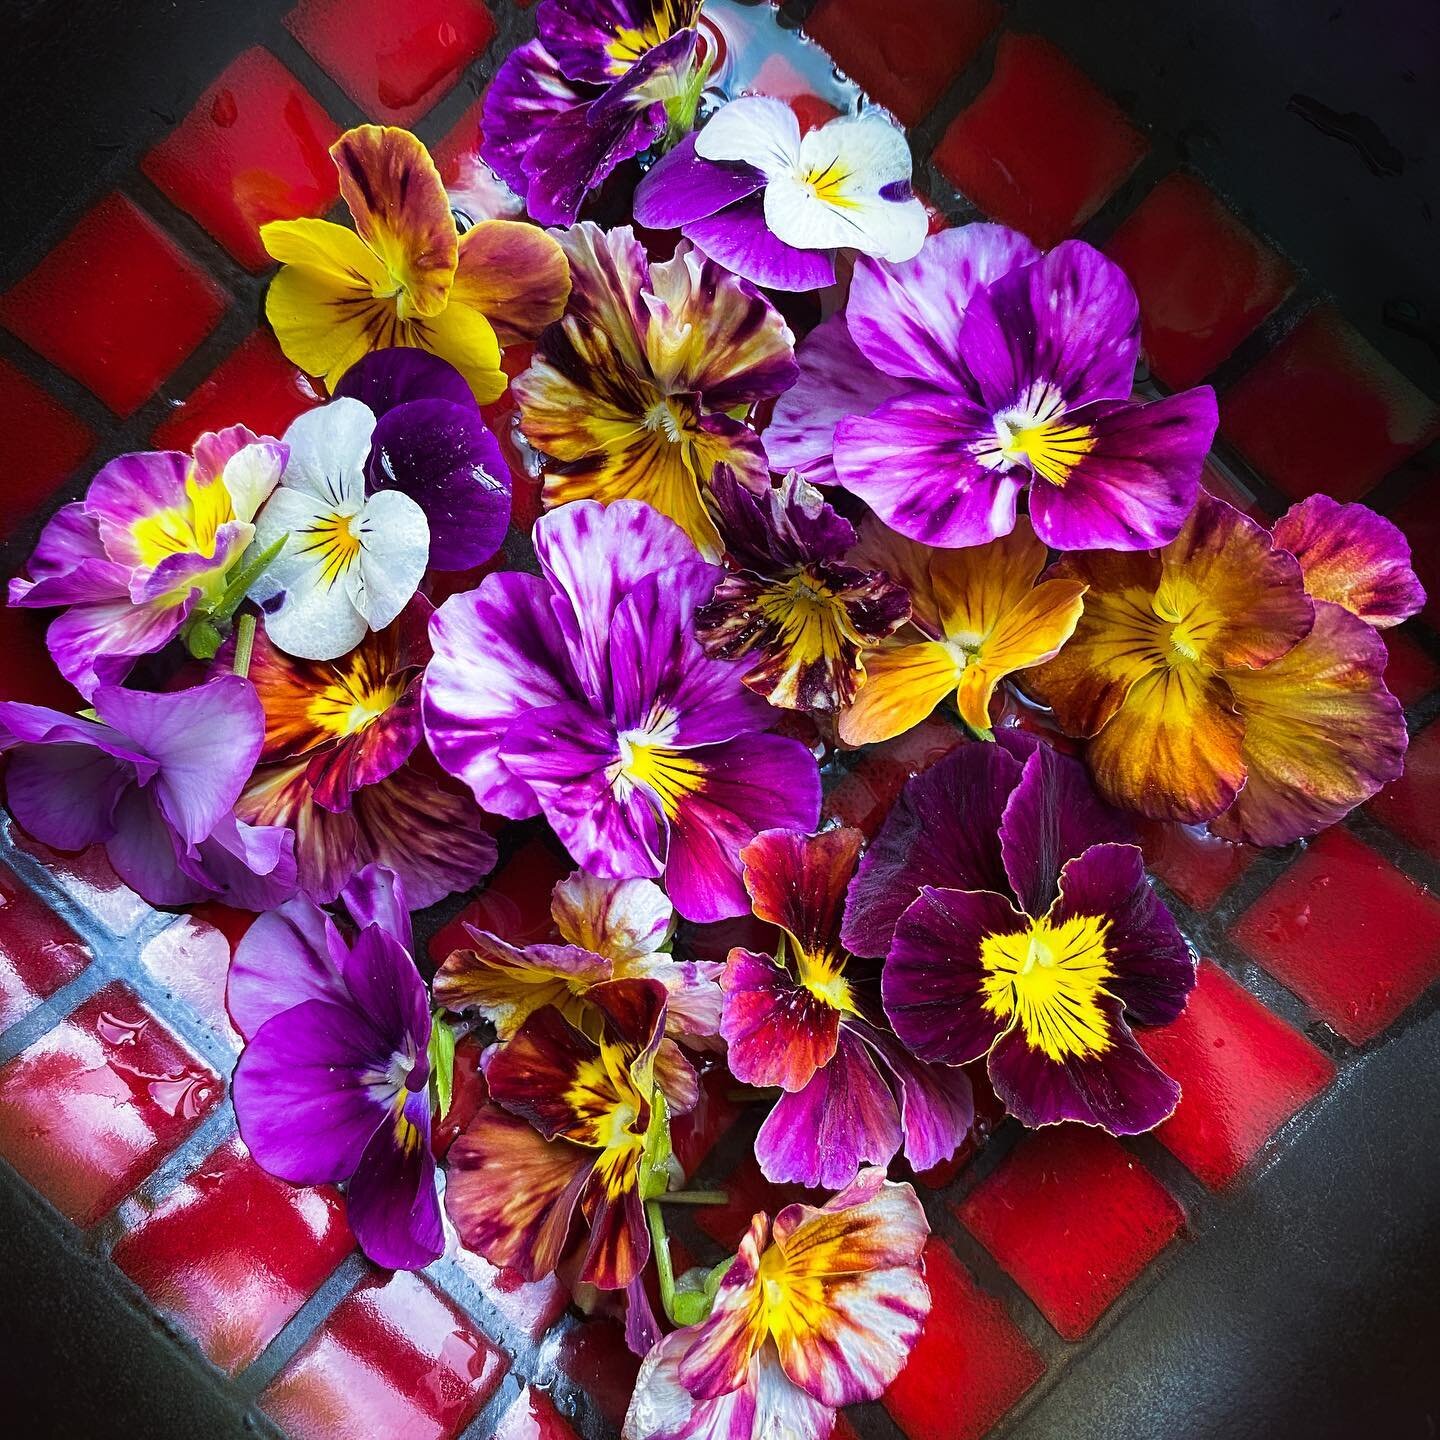 They&rsquo;re so pretty, I don&rsquo;t want to eat it 😍. 
.
These edible flowers were harvested earlier this morning in our little utopia. Well, nothing is a true Utopia. We have our fair share of imperfections and issues from time to time. Hey, ano